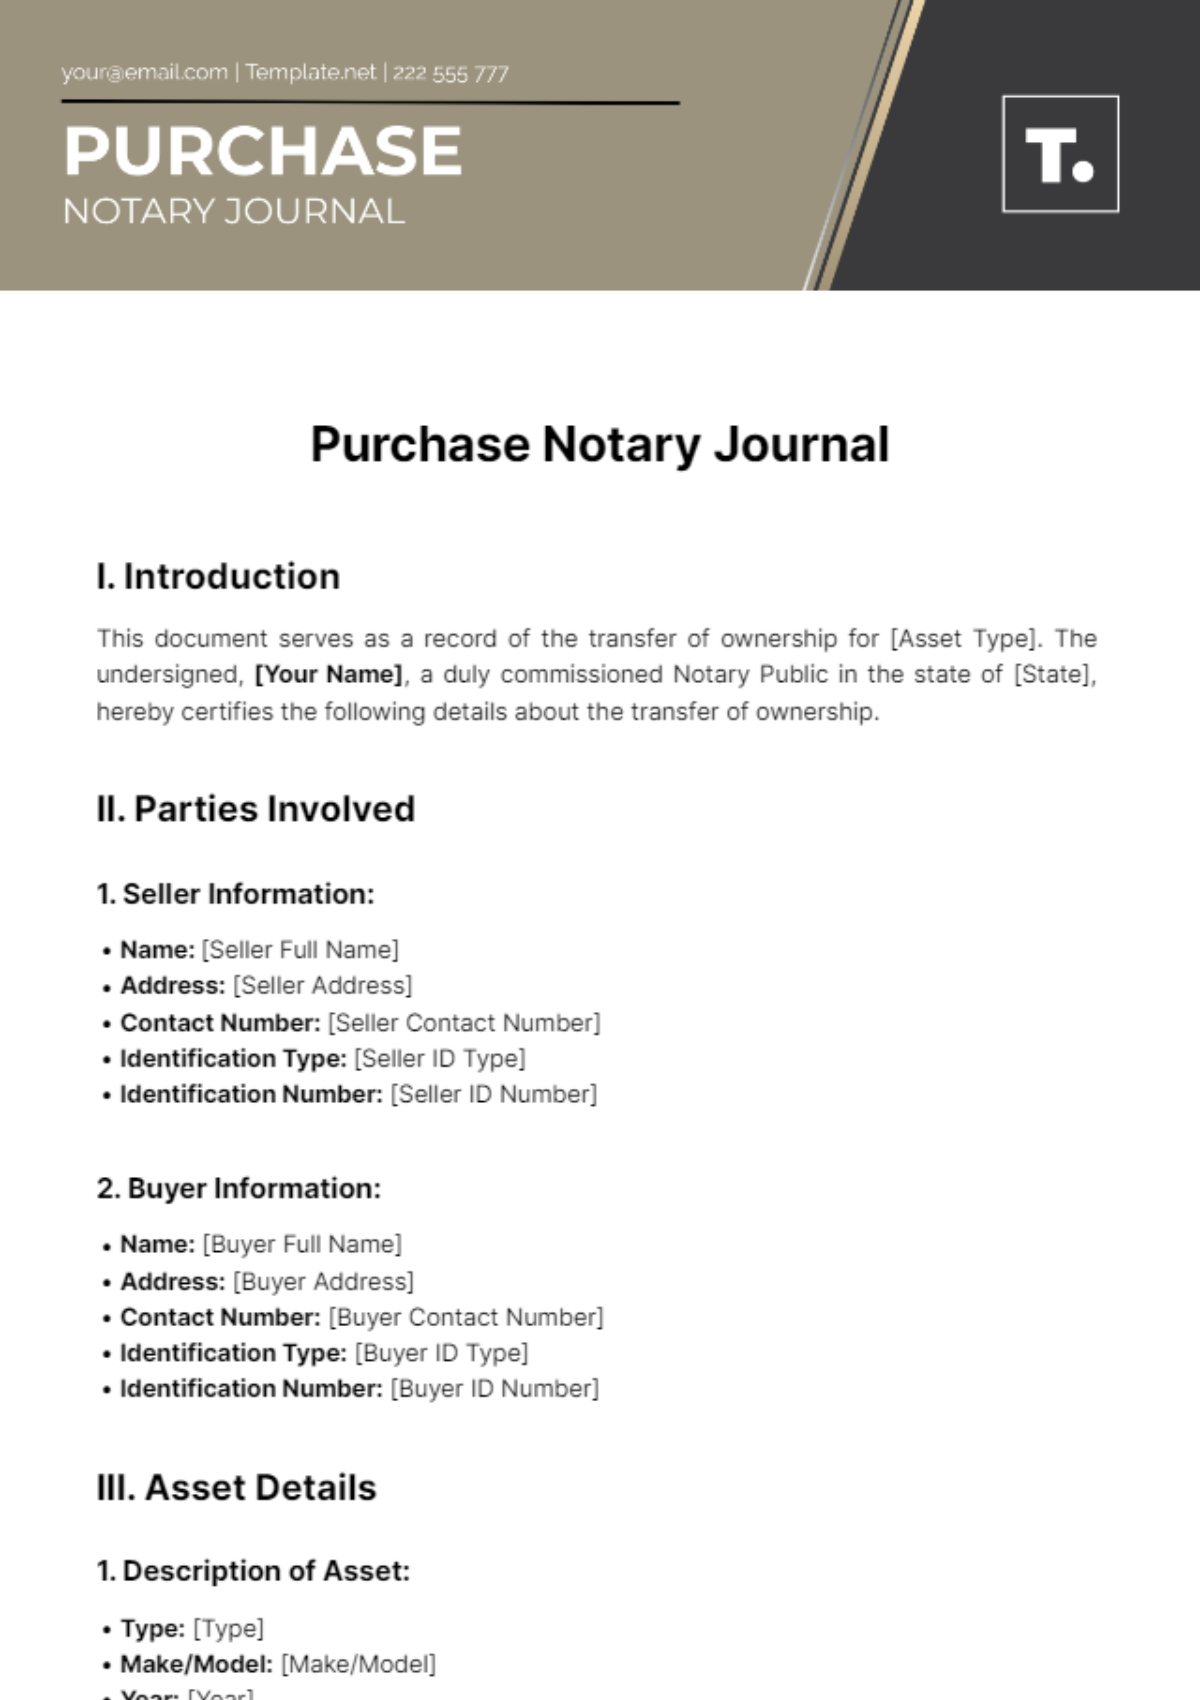 Purchase Notary Journal Template